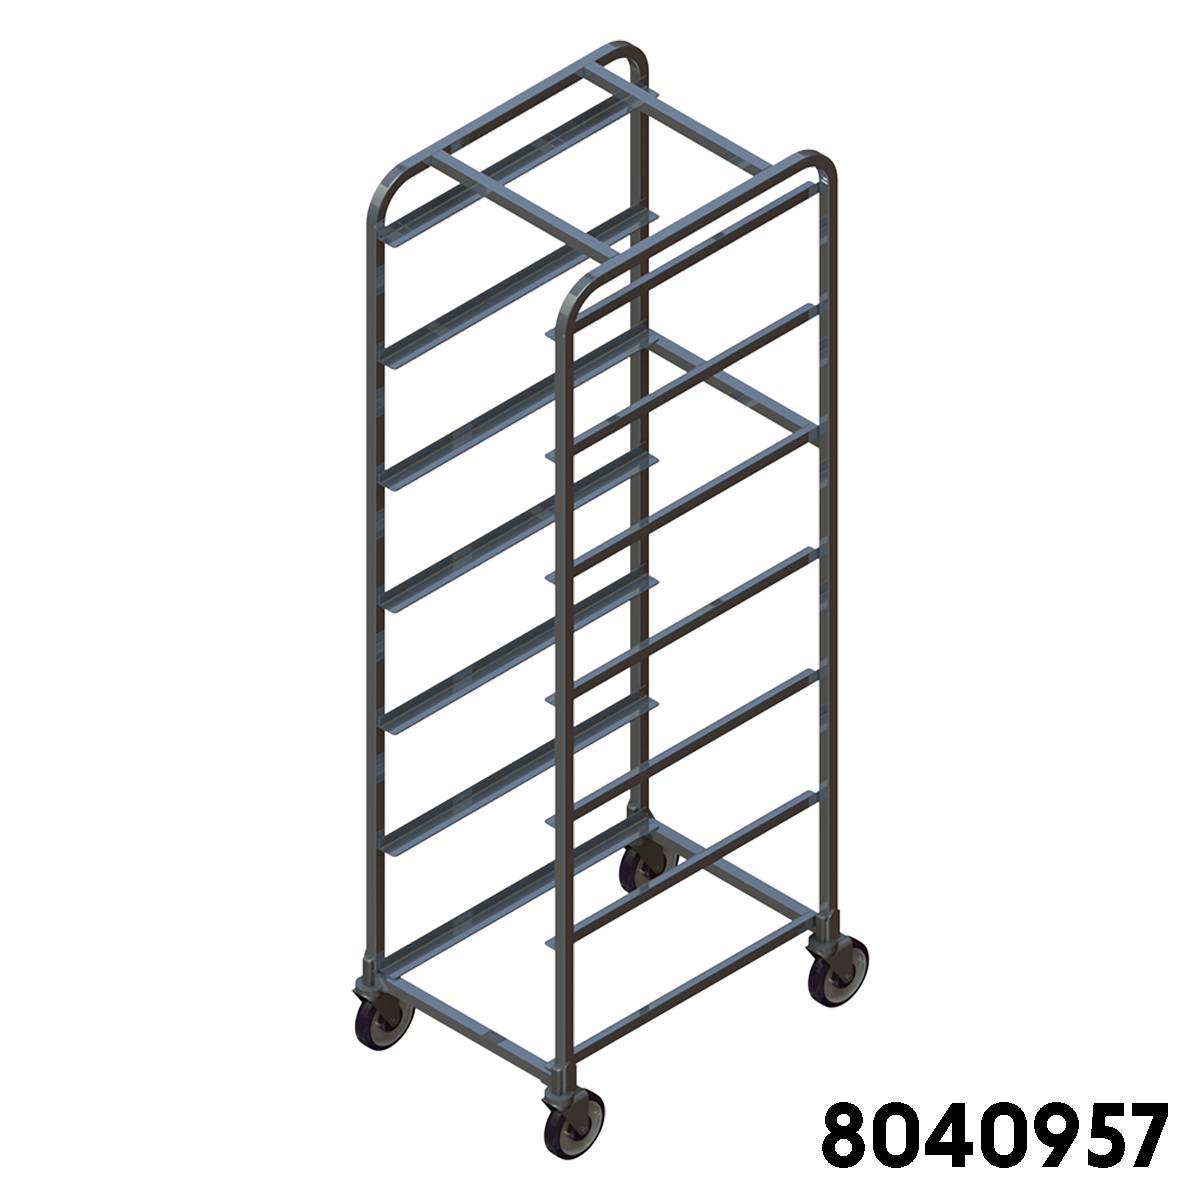 Product Lug Cart Group product-lug-carts nest dollies industrial cart nesting picking cart NSF cart NSF rack NSF approved NSF certified National Sanitation Foundation tray shelf Distribution Cart picking cart tray shelf picking cart, picking cart, ecom cart, ecommerce cart, ecommerce picking cart, picking cart, INDUSTRIAL CARTS, grocery cart grocery picking cart, department store cart, beverage cart NSF approved. This food service cart meets strict standards and procedures imposed by NSF. lug cart